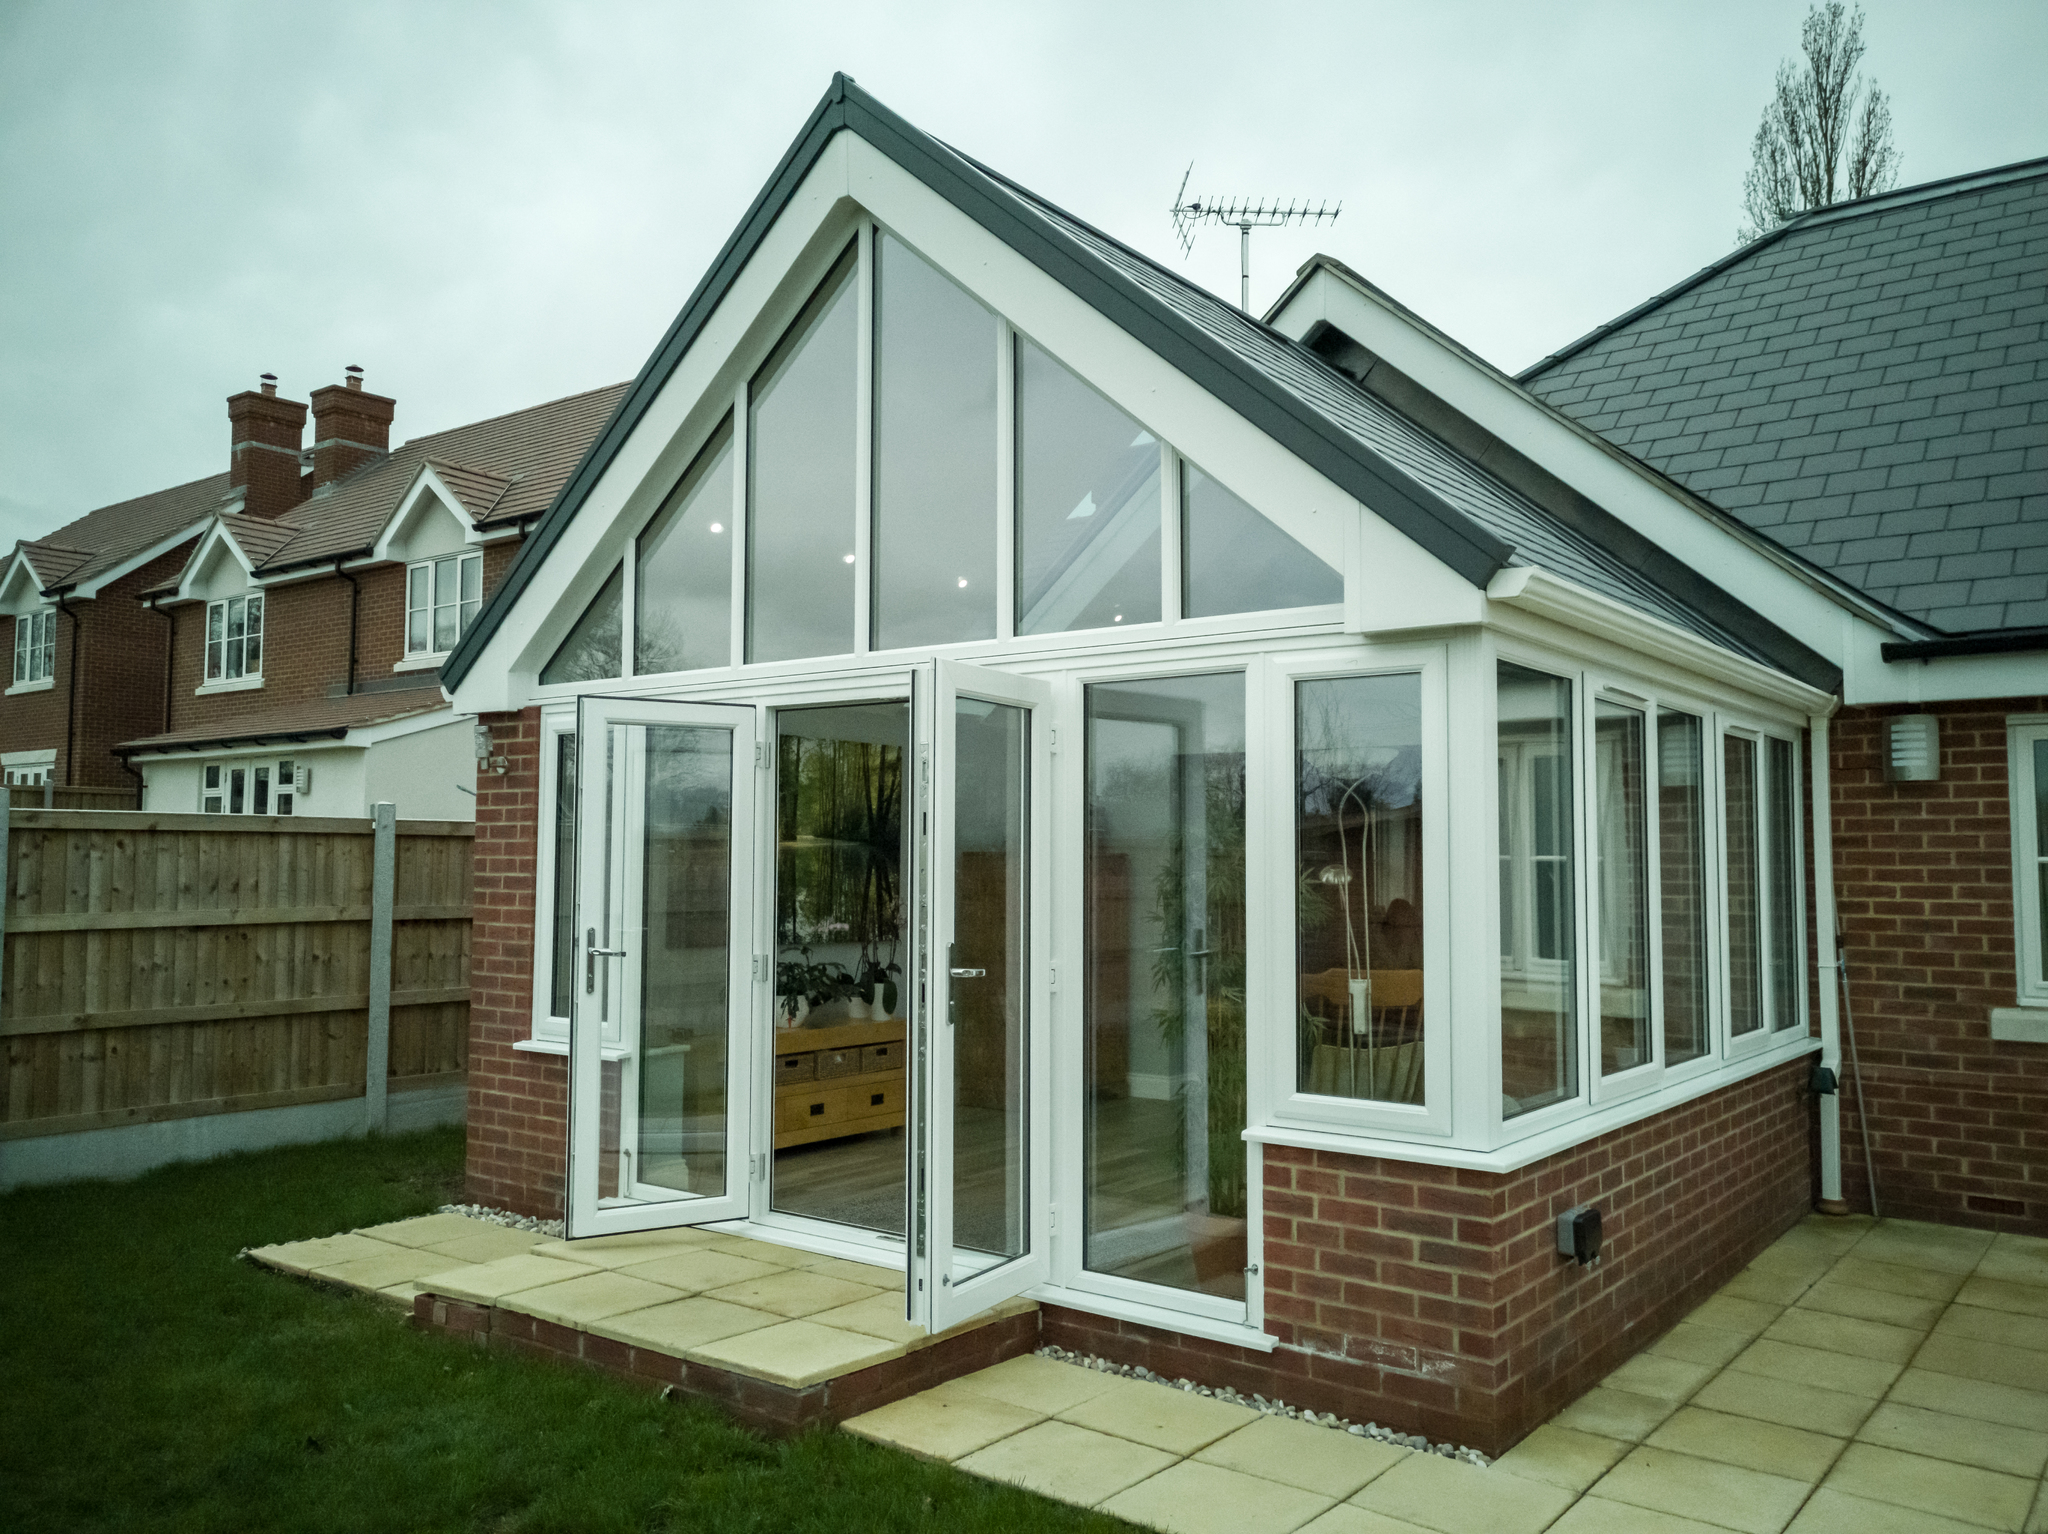 Front perspective of a lovely conservatory design created by 21st Century.